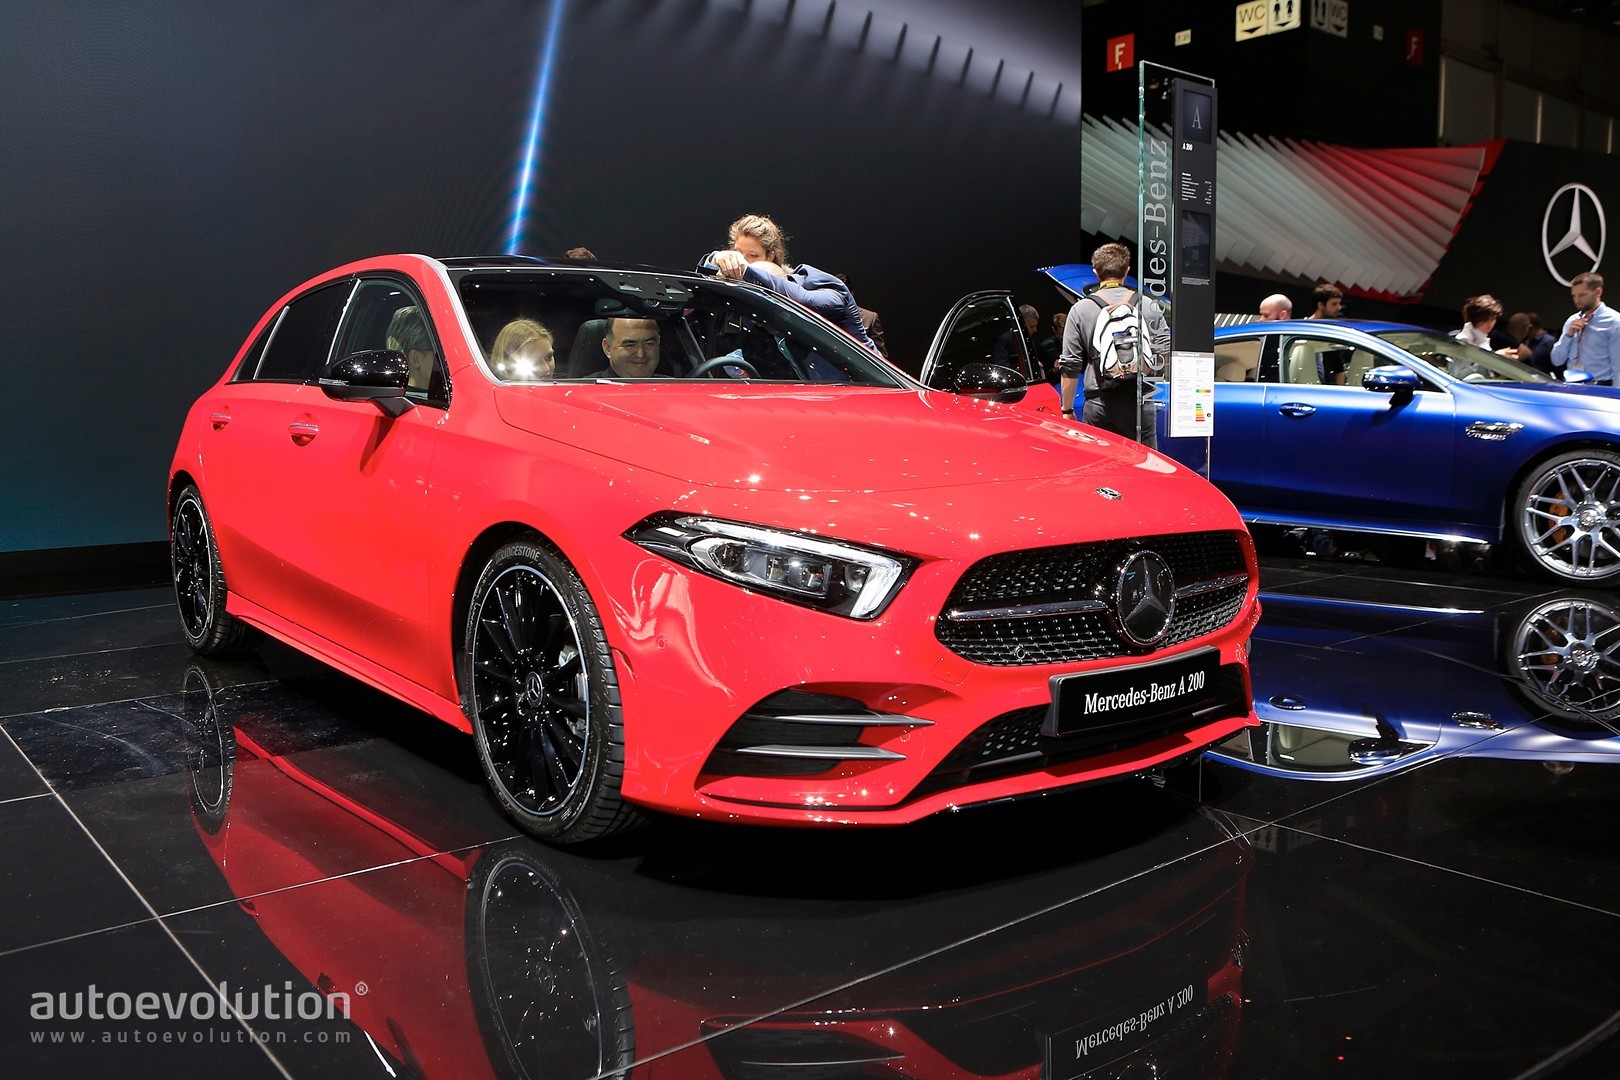 Mercedes-Benz-A-Class-2019-co-duy-nhat-ban-may-dau-anh-1